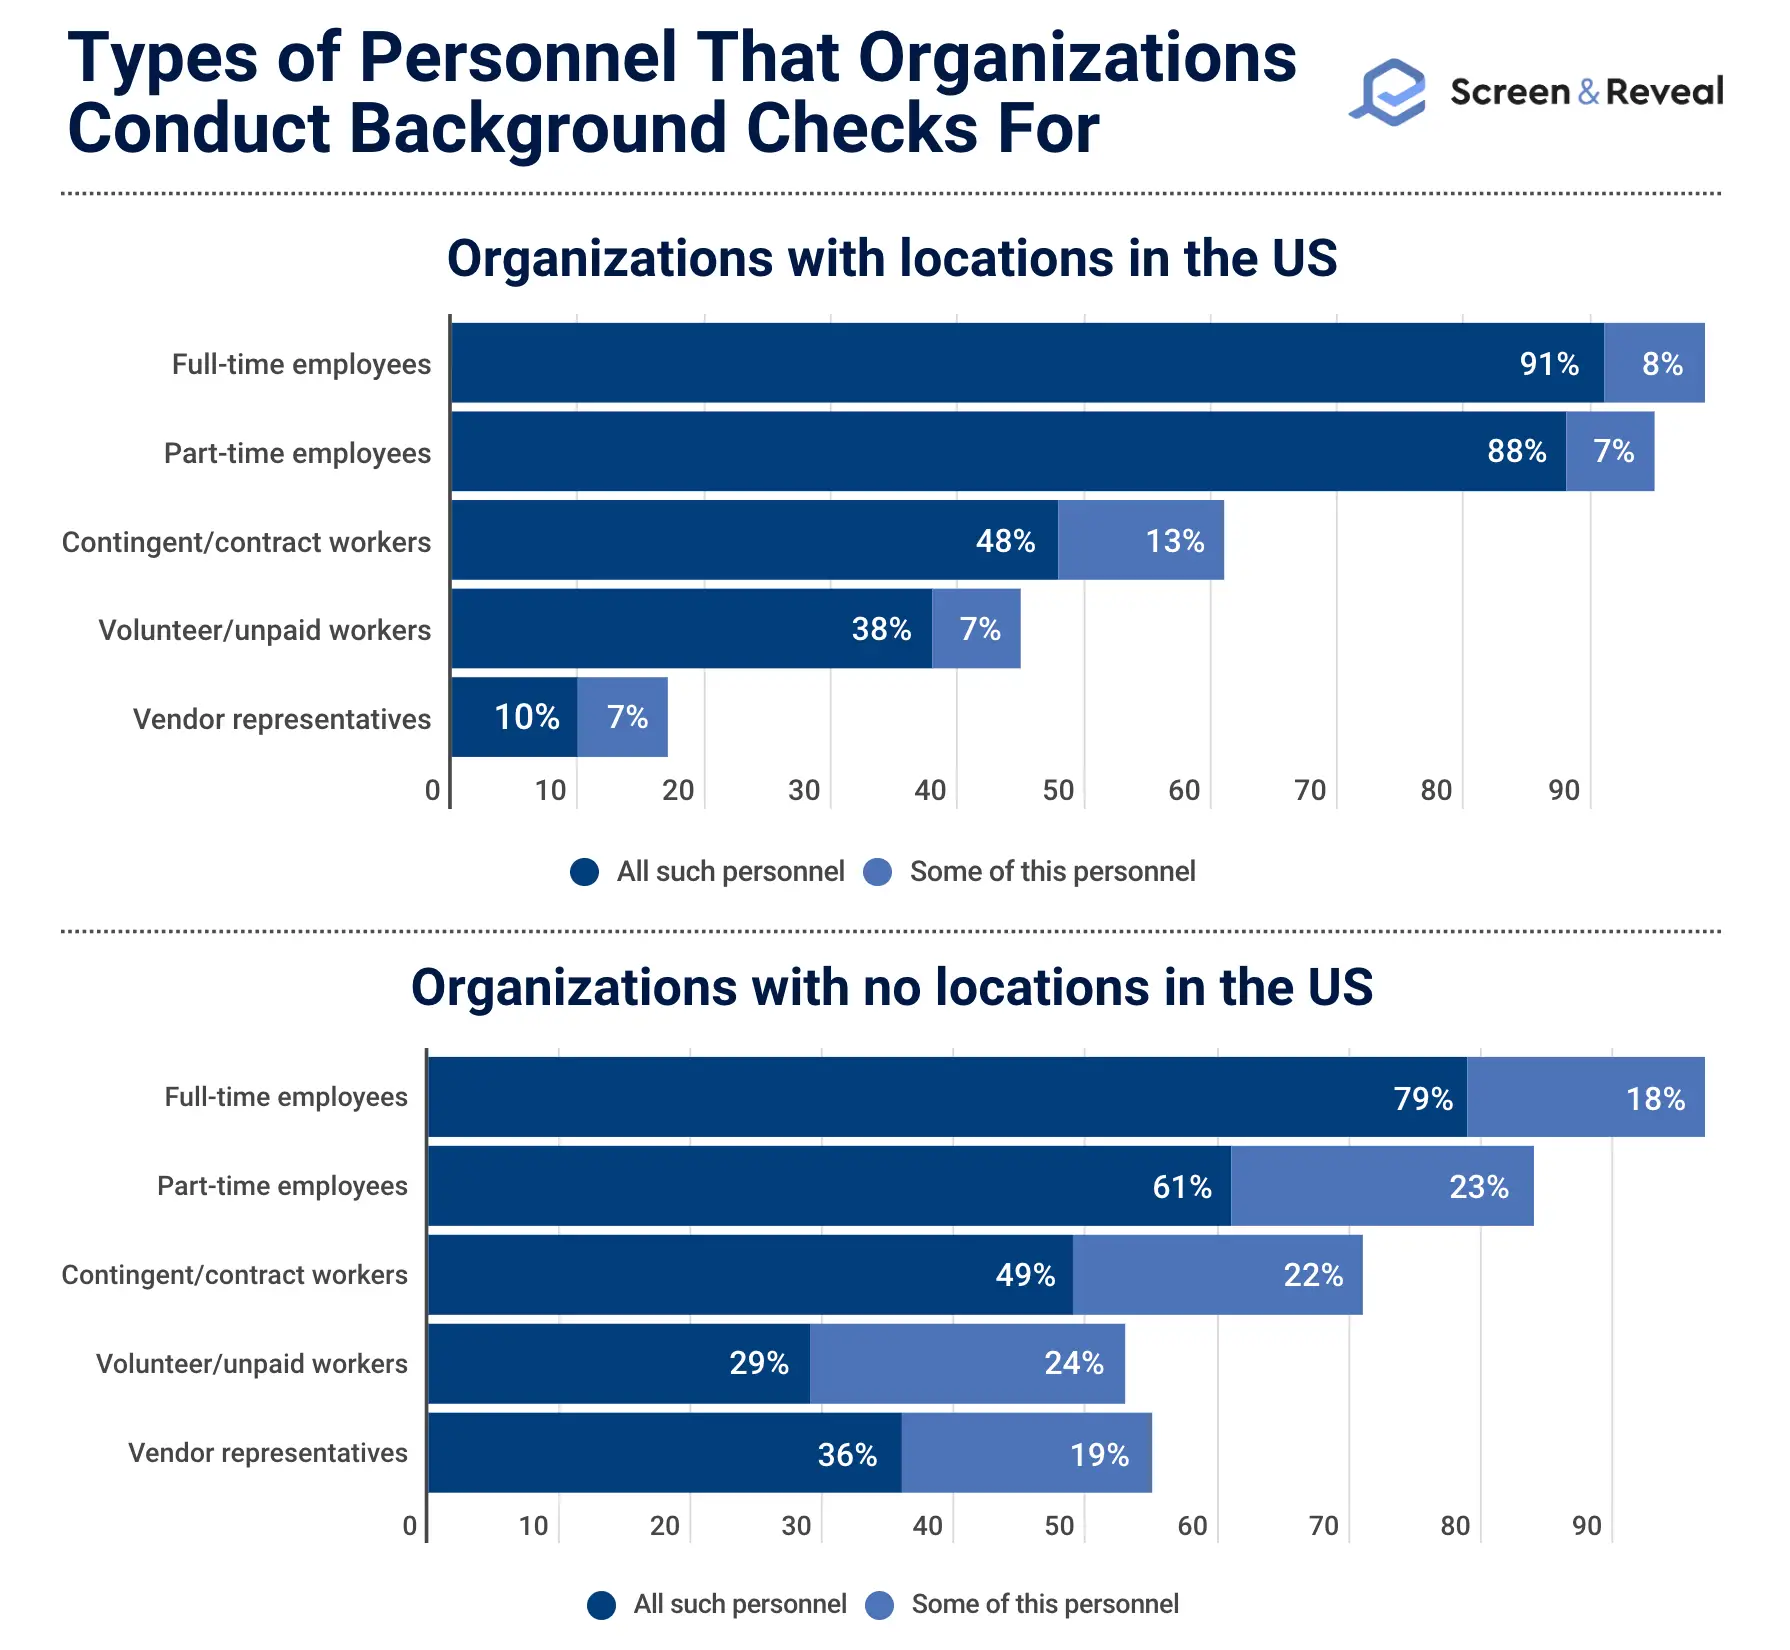 Types of Personnel That Organizations Conduct Background Checks For